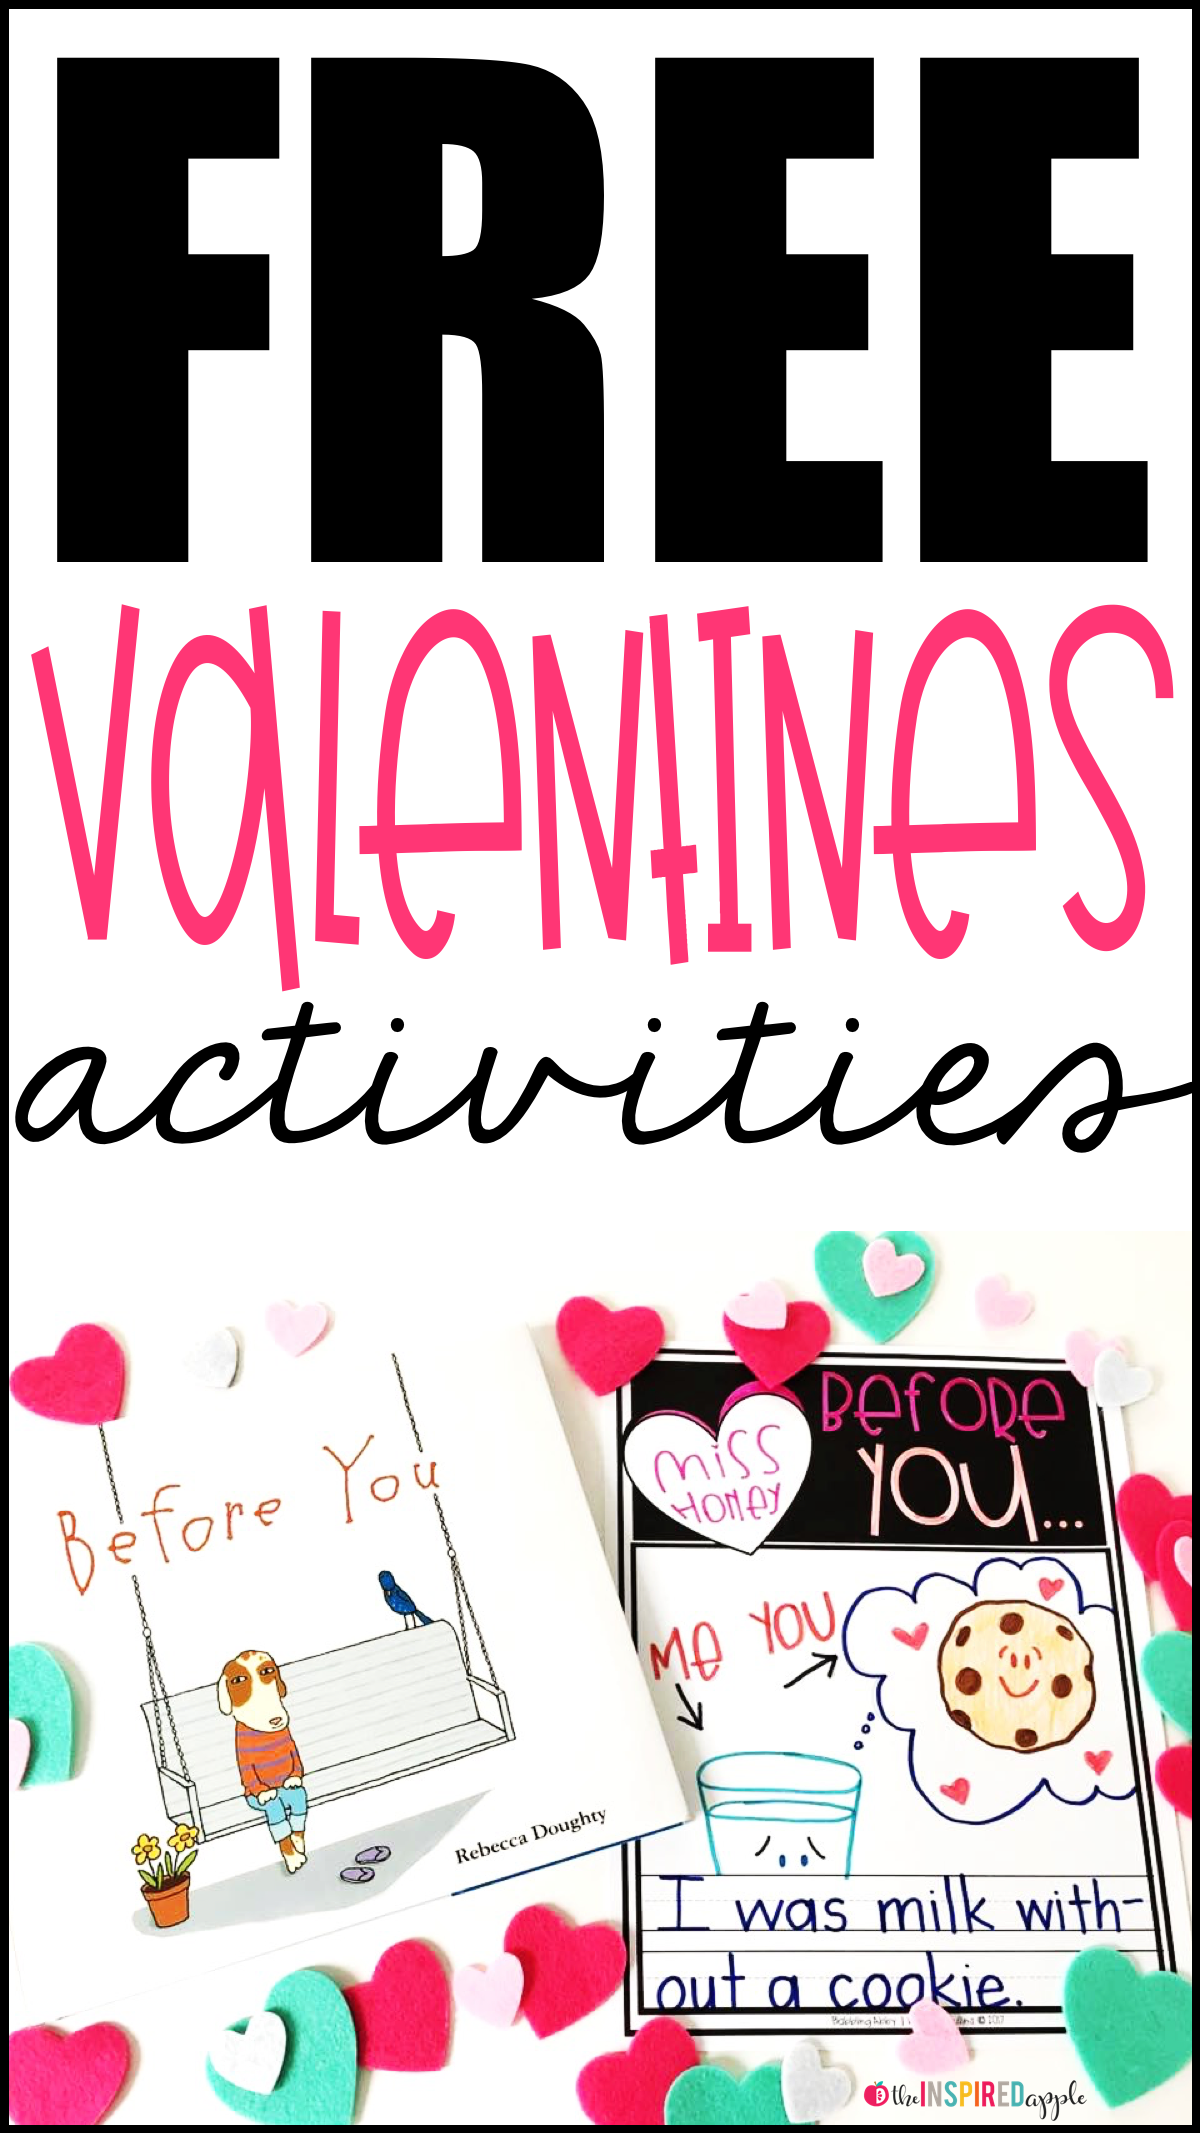 Want a fun and FREE Valentine writing activity? Then you must check out this companion activity to Before You by Rebecca Doughty, with an extension to use with Melanie Watt's You're Finally Here! These are perfect for your kindergarten, first grade, and second grade students.